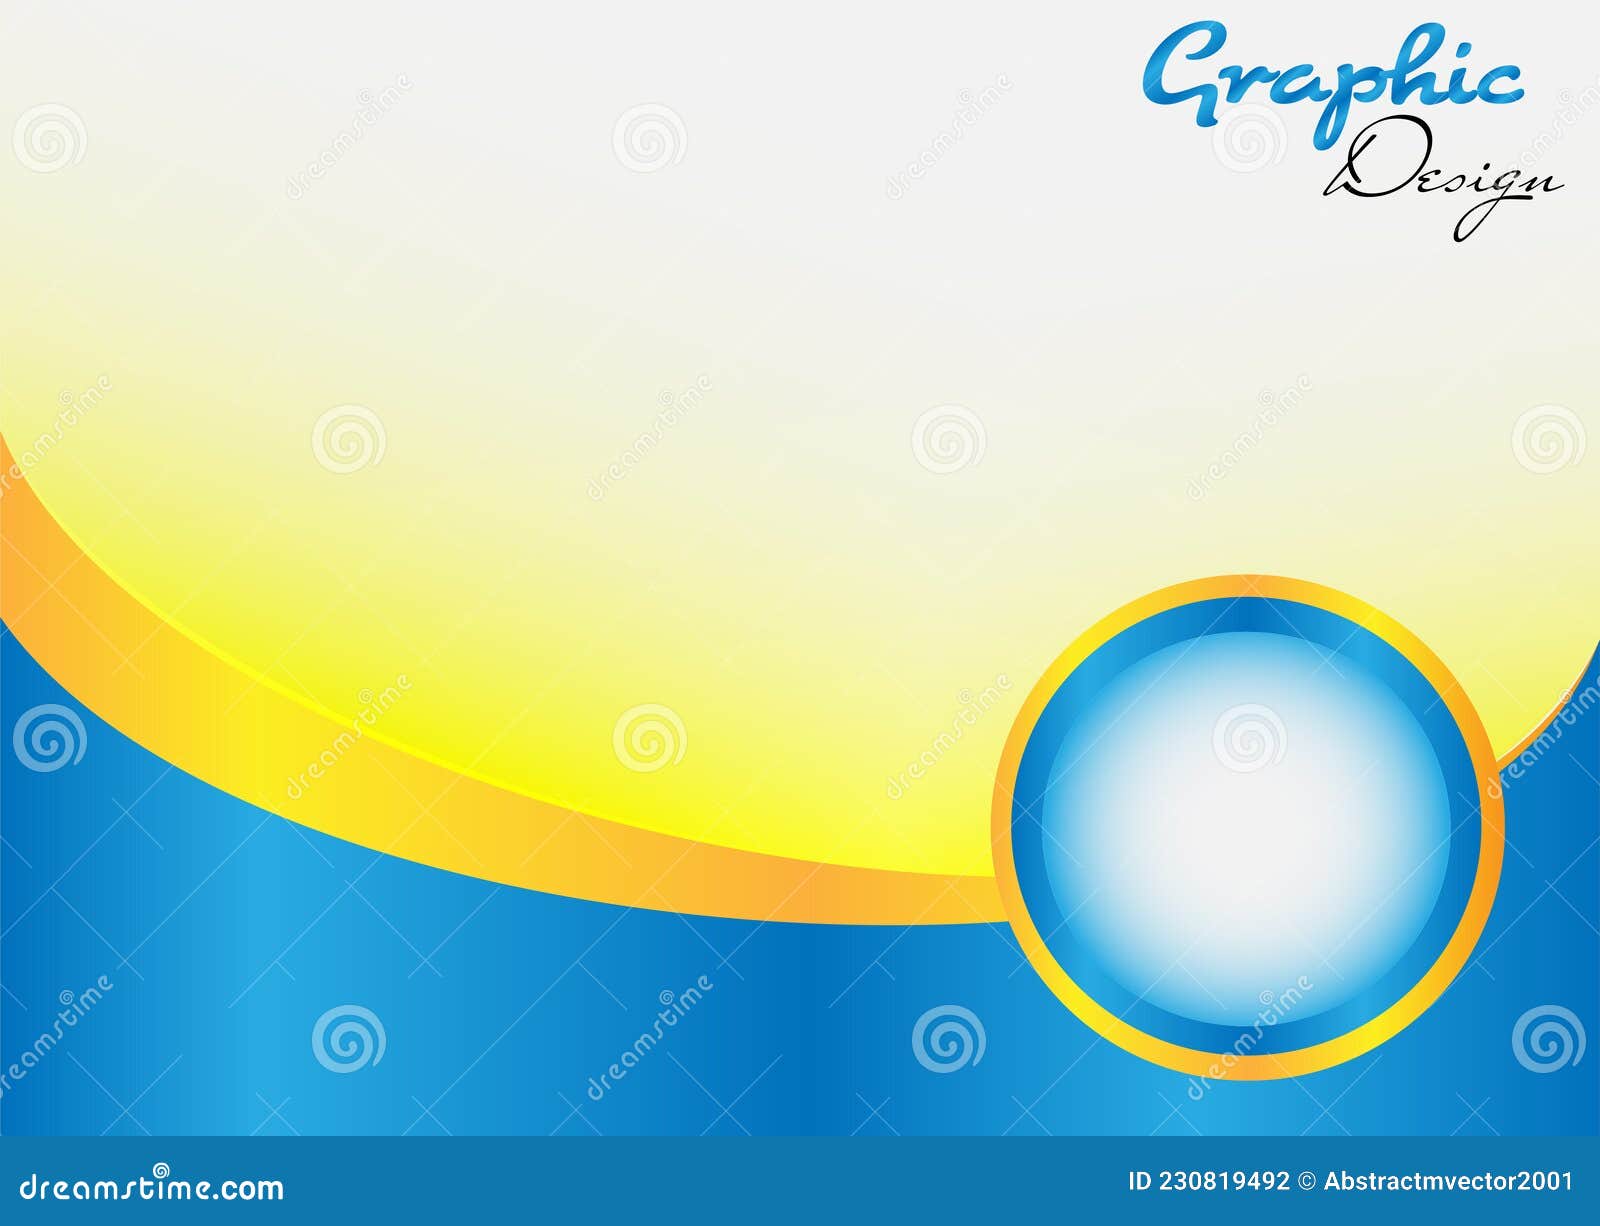 Blue and Yellow Color Simple Abstract Vector Background Art for Anything  Stock Vector - Illustration of backdrop, artisitic: 230819492